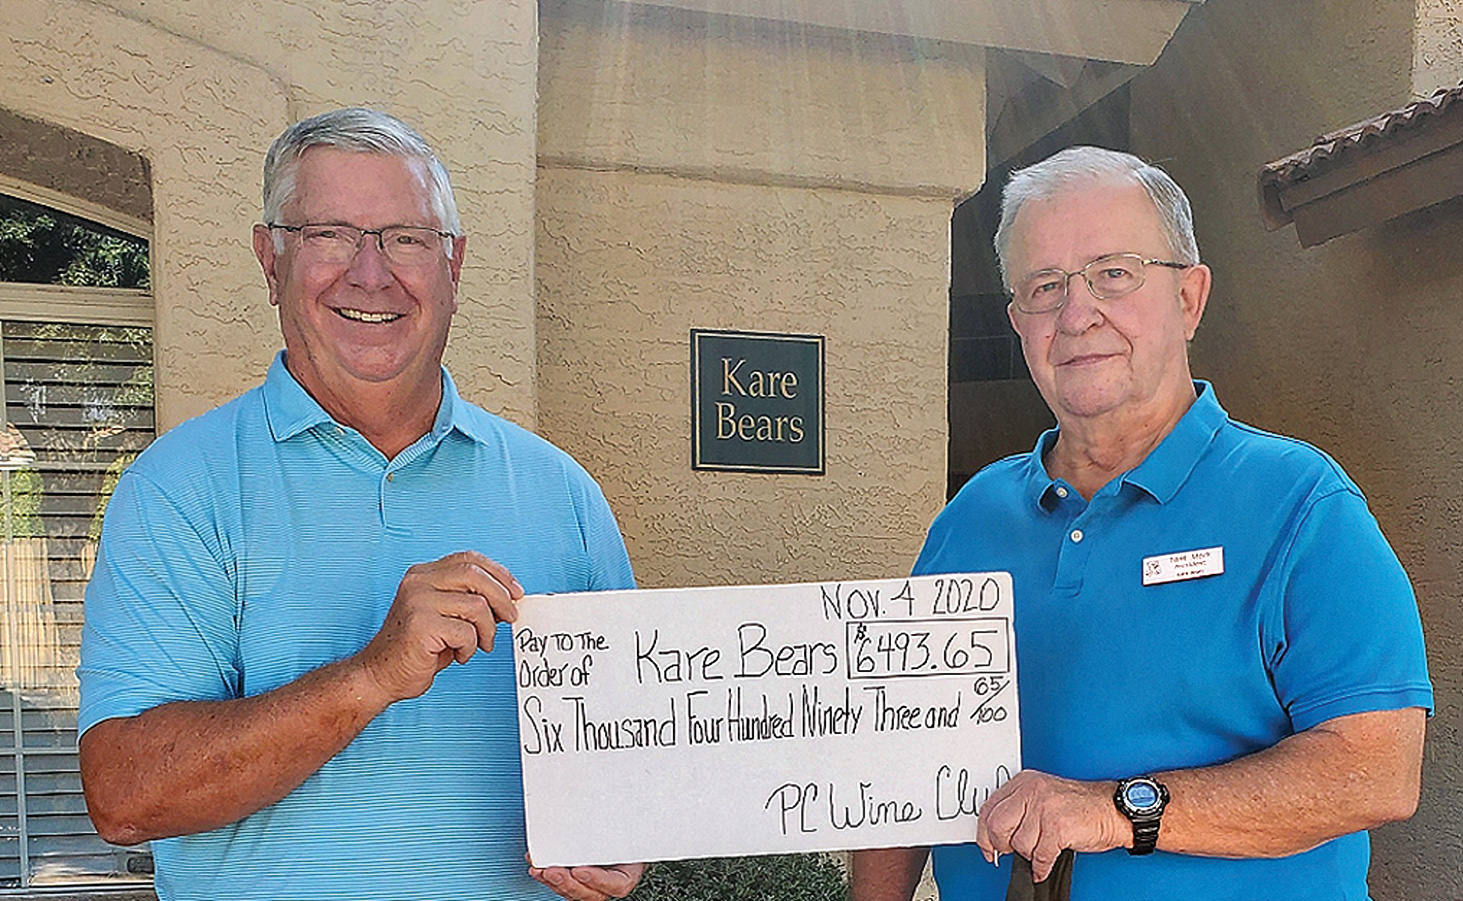 Culver Stone (left), President of the PebbleCreek Wine Club, presented Tom Meek (right), President of the Kare Bears, with a check for $6,493.65 on Nov. 4. That donation brings the PebbleCreek Wine Club’s financial support of Kare Bears, over the last three years, to $26,493.65.